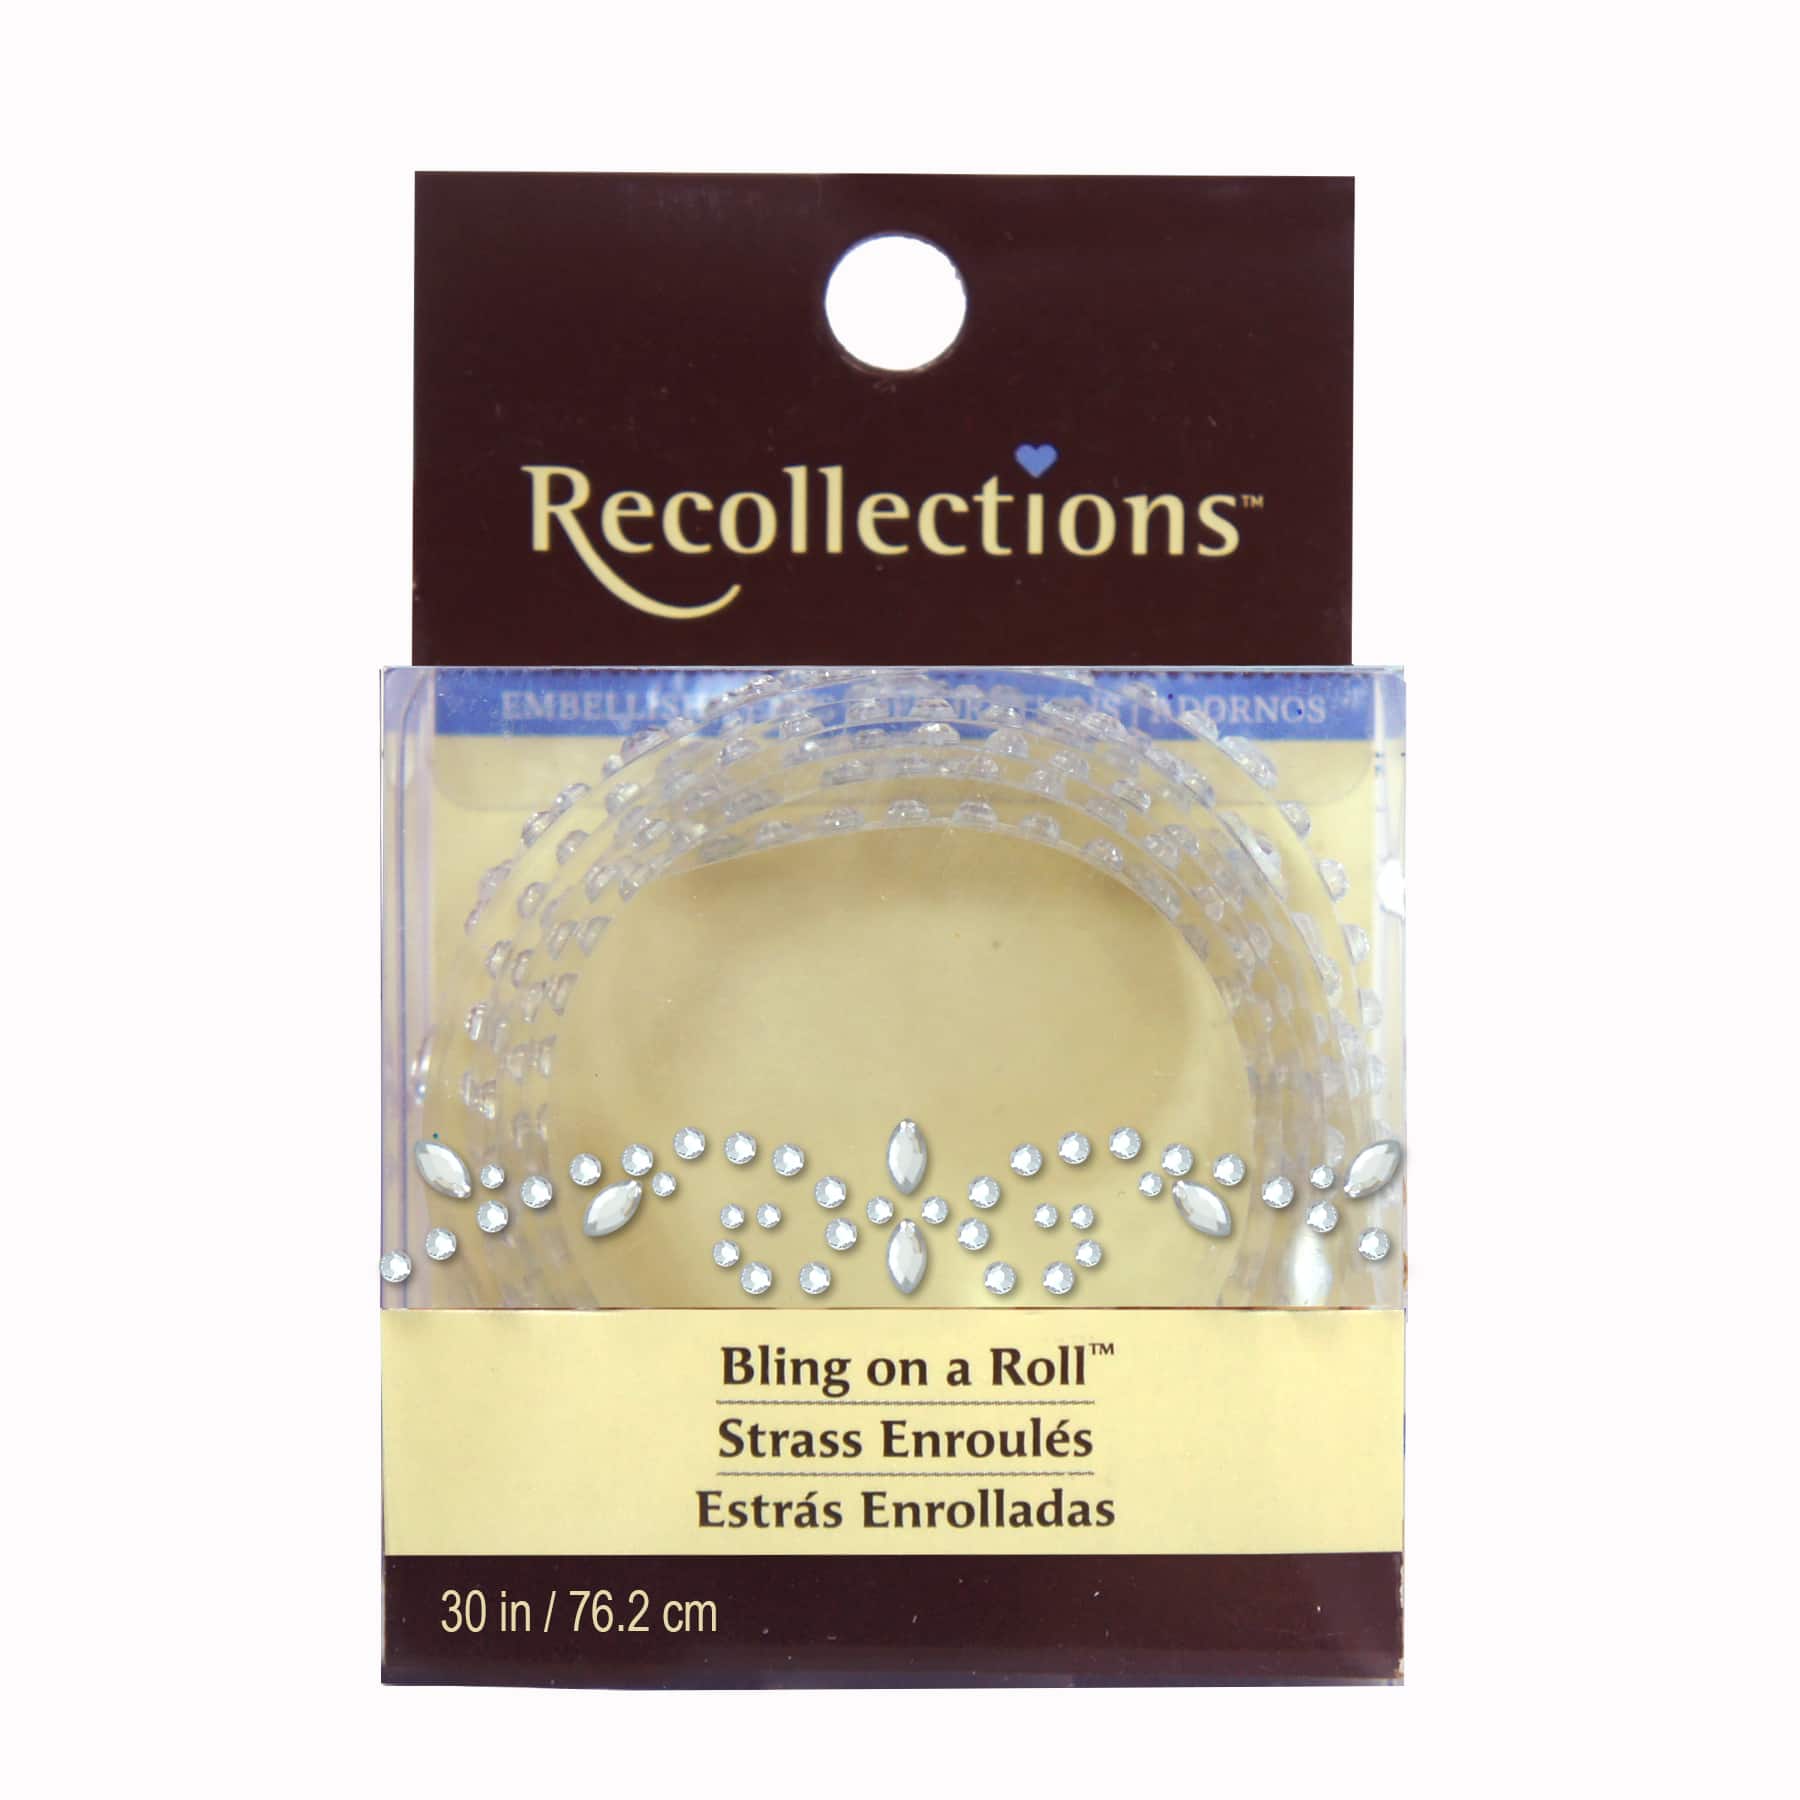 Bling Stickers Variety Pack by Recollections™